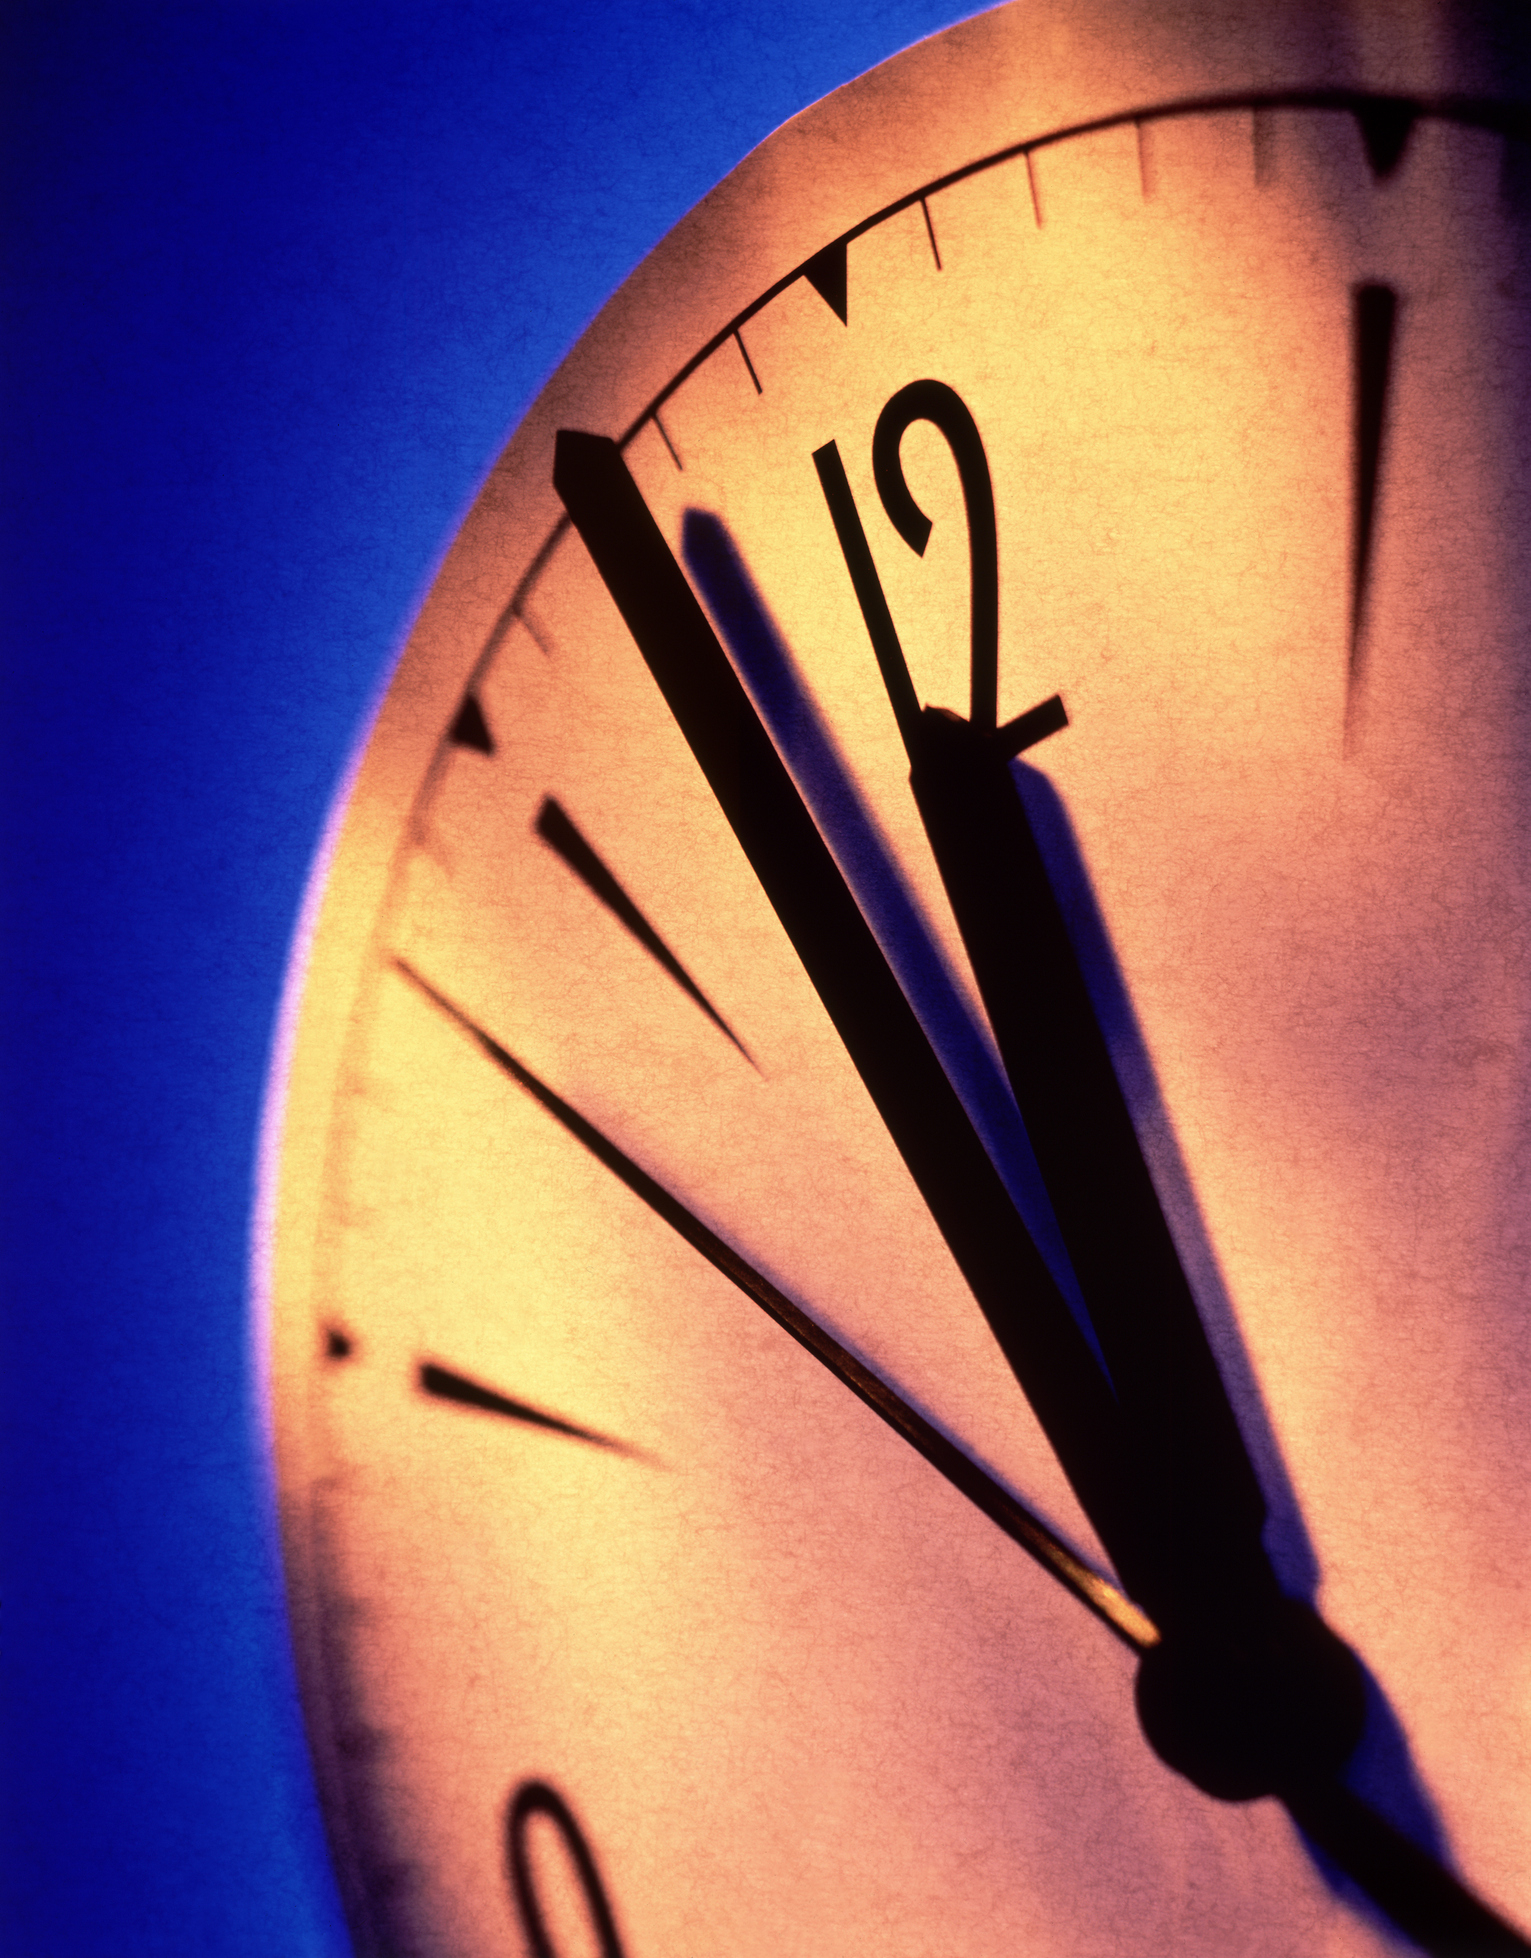 Close-up of a clock showing the time at one minute past twelve